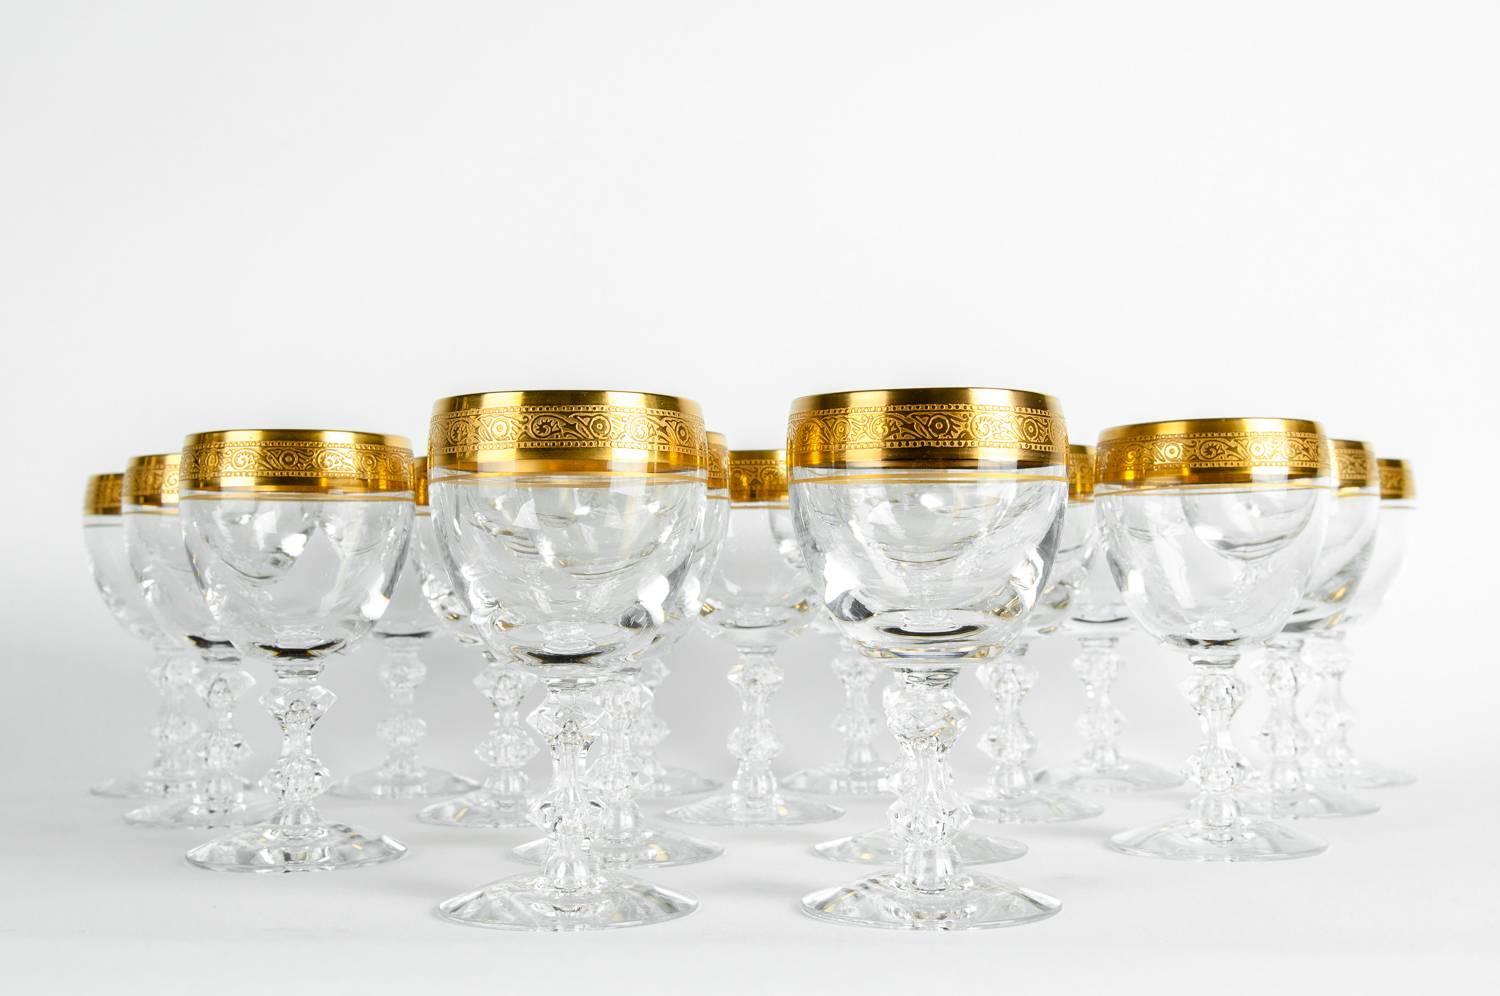 Vintage Cut Crystal with Gold Design Top Wine/Water Glassware Set 1